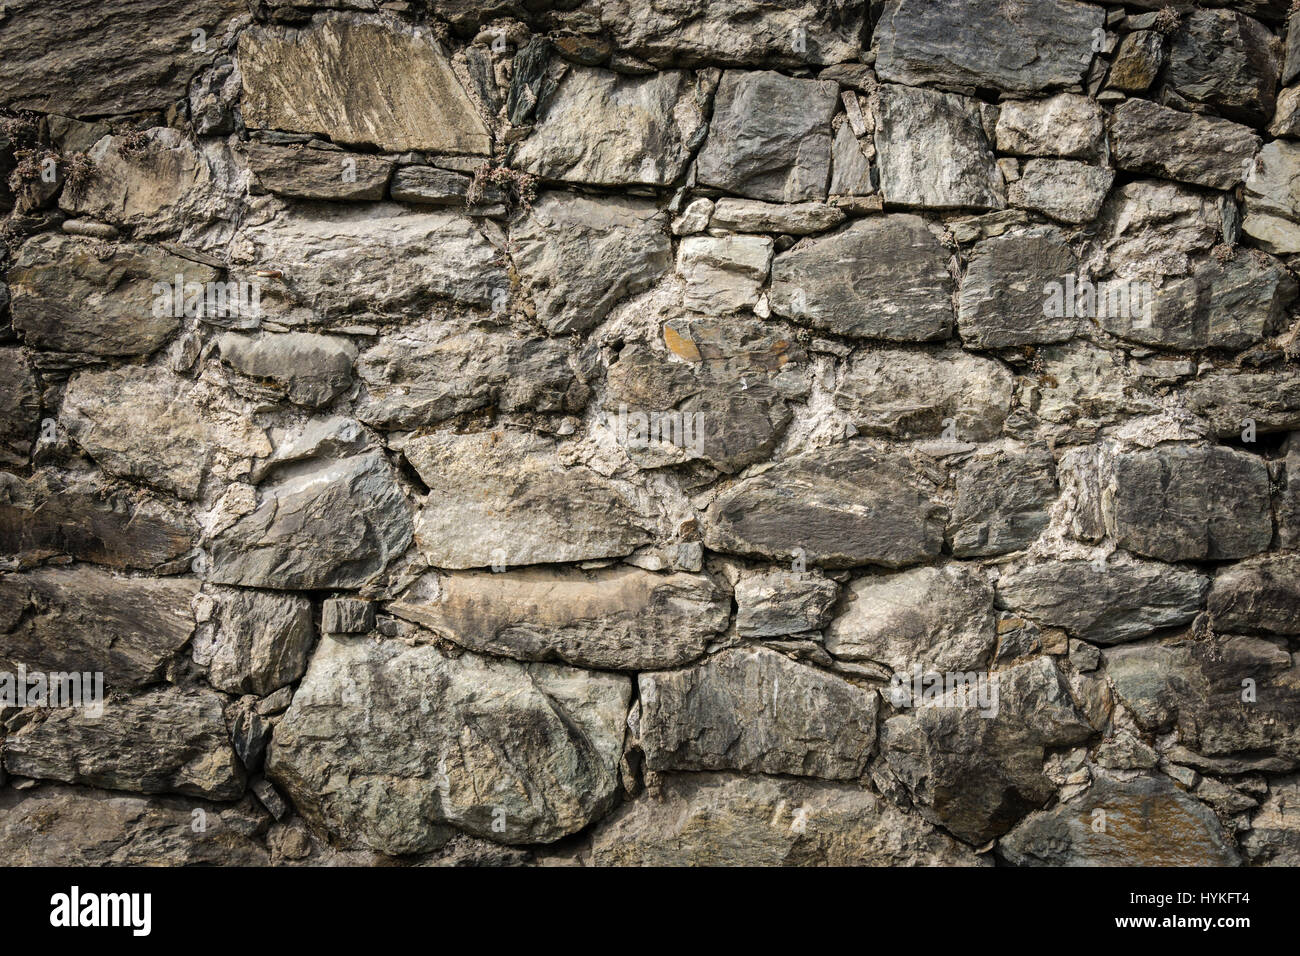 Masoned rock wall of natural stones with nice vignetting Stock Photo